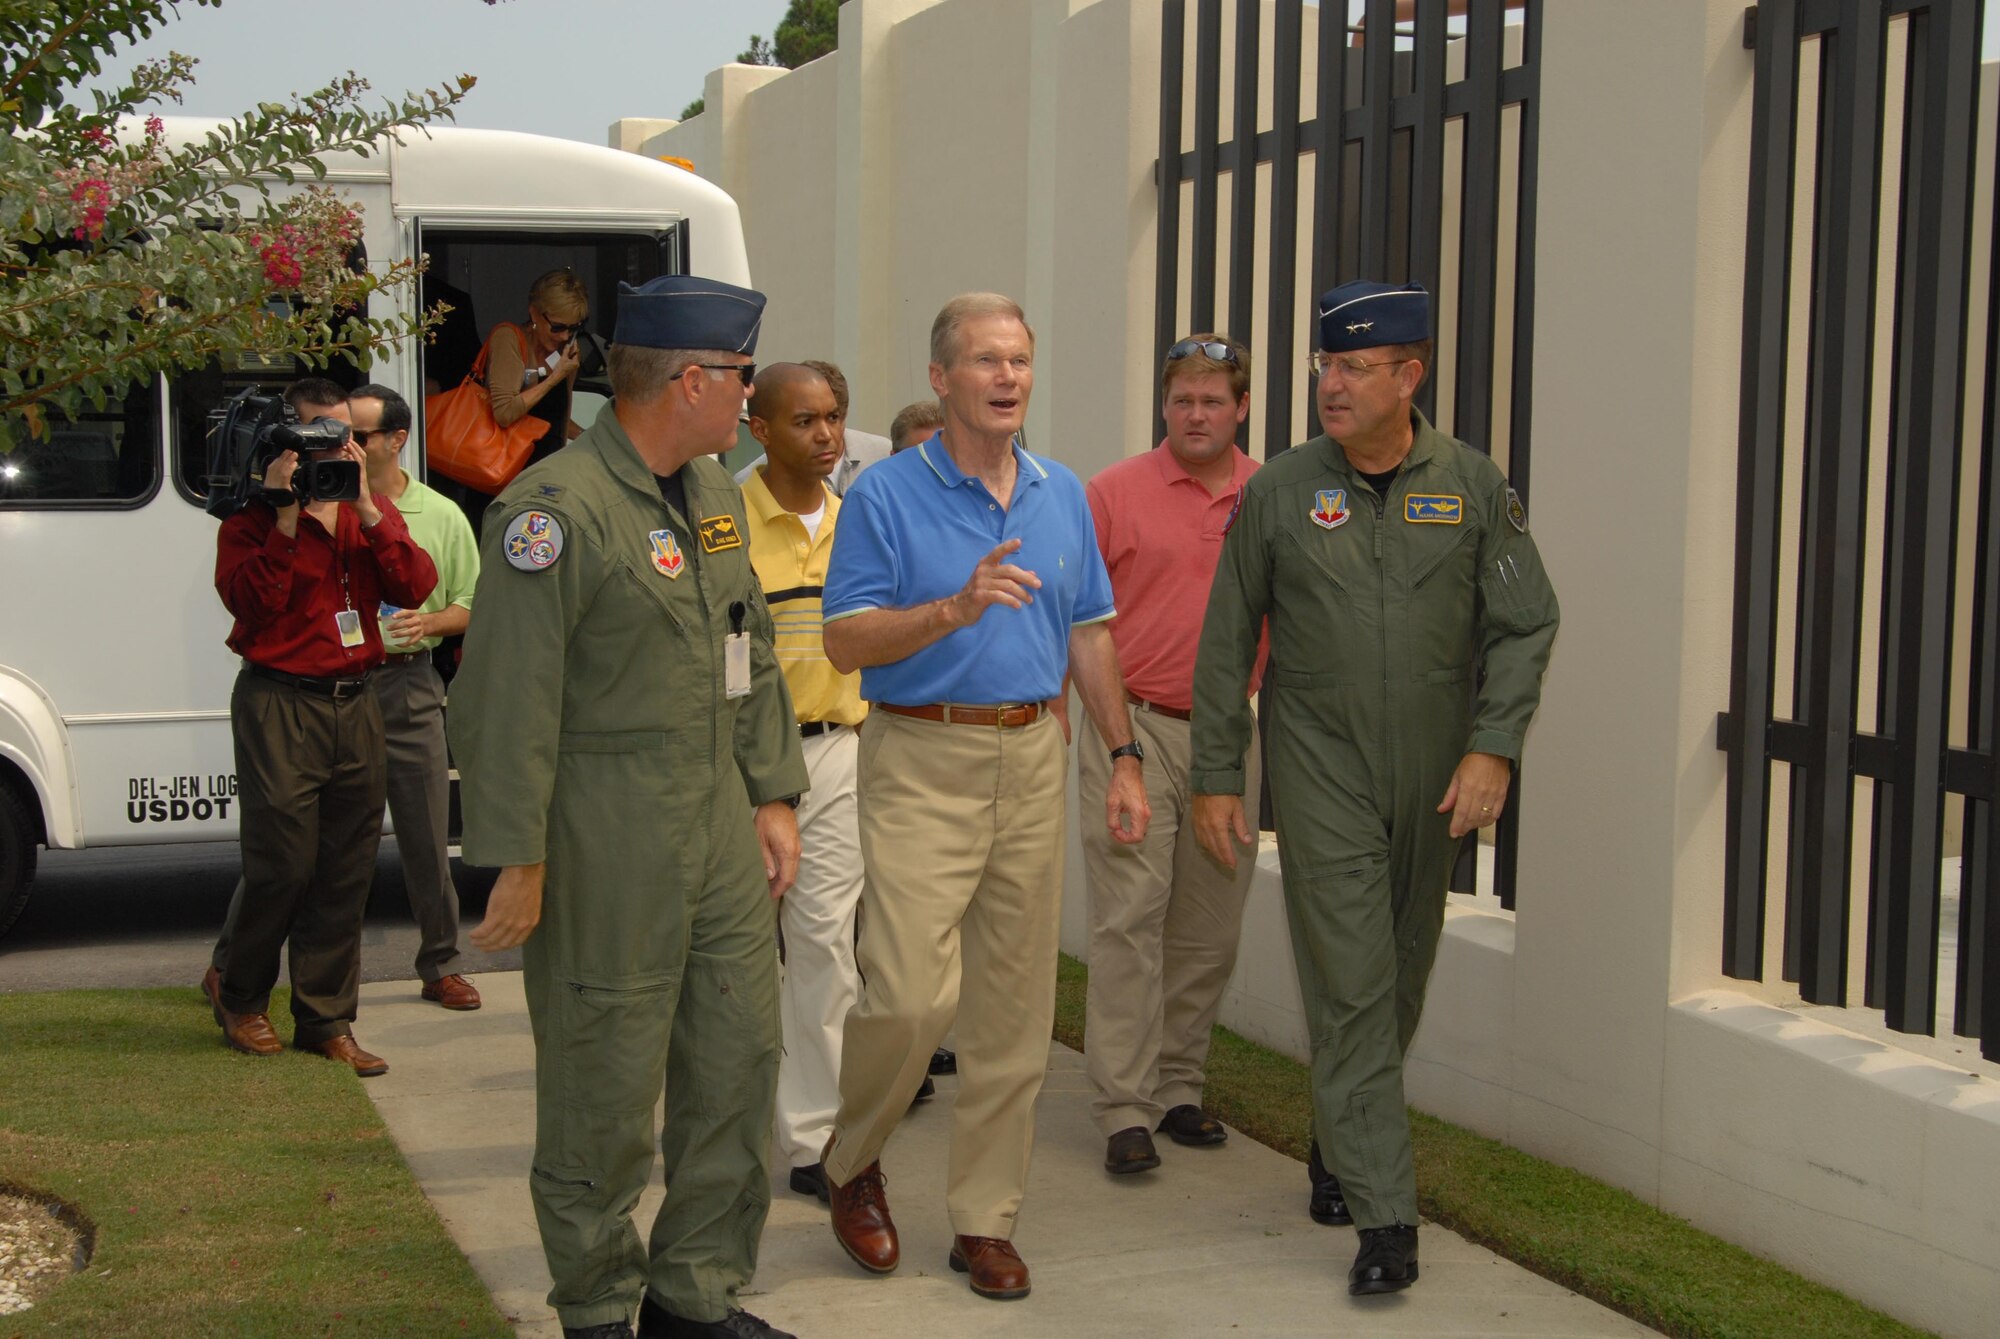 (L-R) Col. David Kriner, 601st Air and Space Operations Commander, Florida Senator Bill Nelson, and Maj. Gen. Hank Morrow, 1st Air Force Commander, begin their tour as the senator arrives at the 601st AOC compound.  Senator Nelson visited Tyndall AFB, August 9, 2007,  as part of his scheduled Florida panhandle tour.  (USAF photo/Lisa Norman)